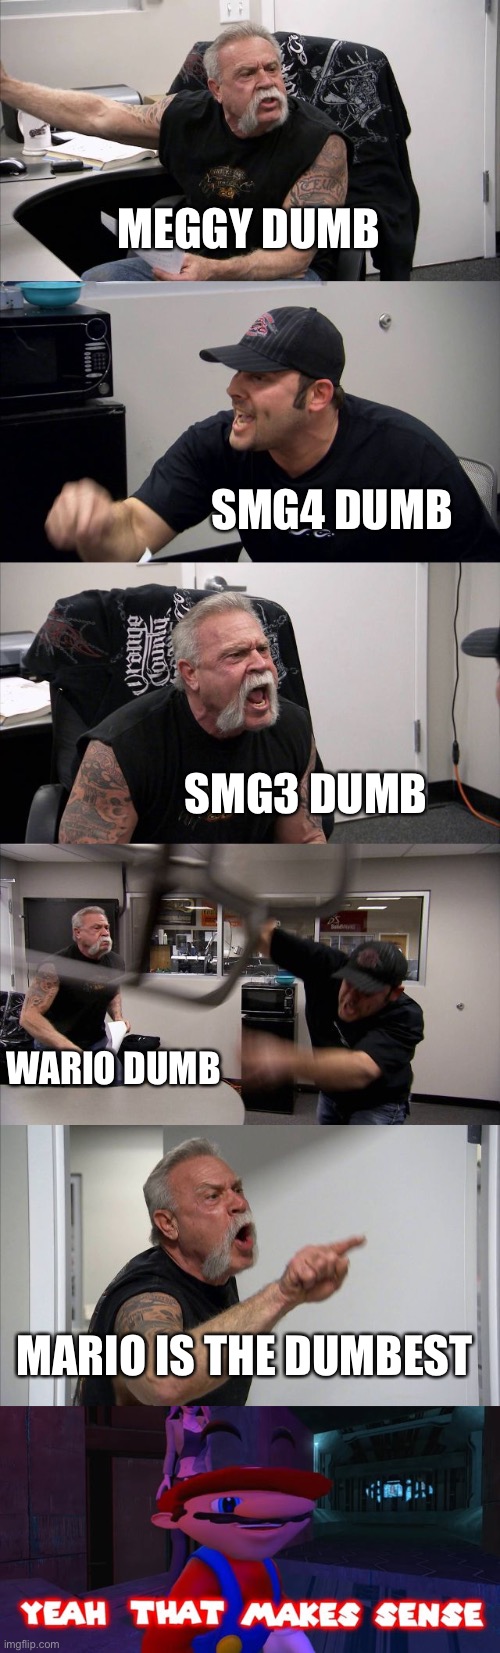 A lot was angry with the other one, so i made this! (Forgive me plz) | MEGGY DUMB; SMG4 DUMB; SMG3 DUMB; WARIO DUMB; MARIO IS THE DUMBEST | image tagged in memes,american chopper argument,mario that make sense | made w/ Imgflip meme maker